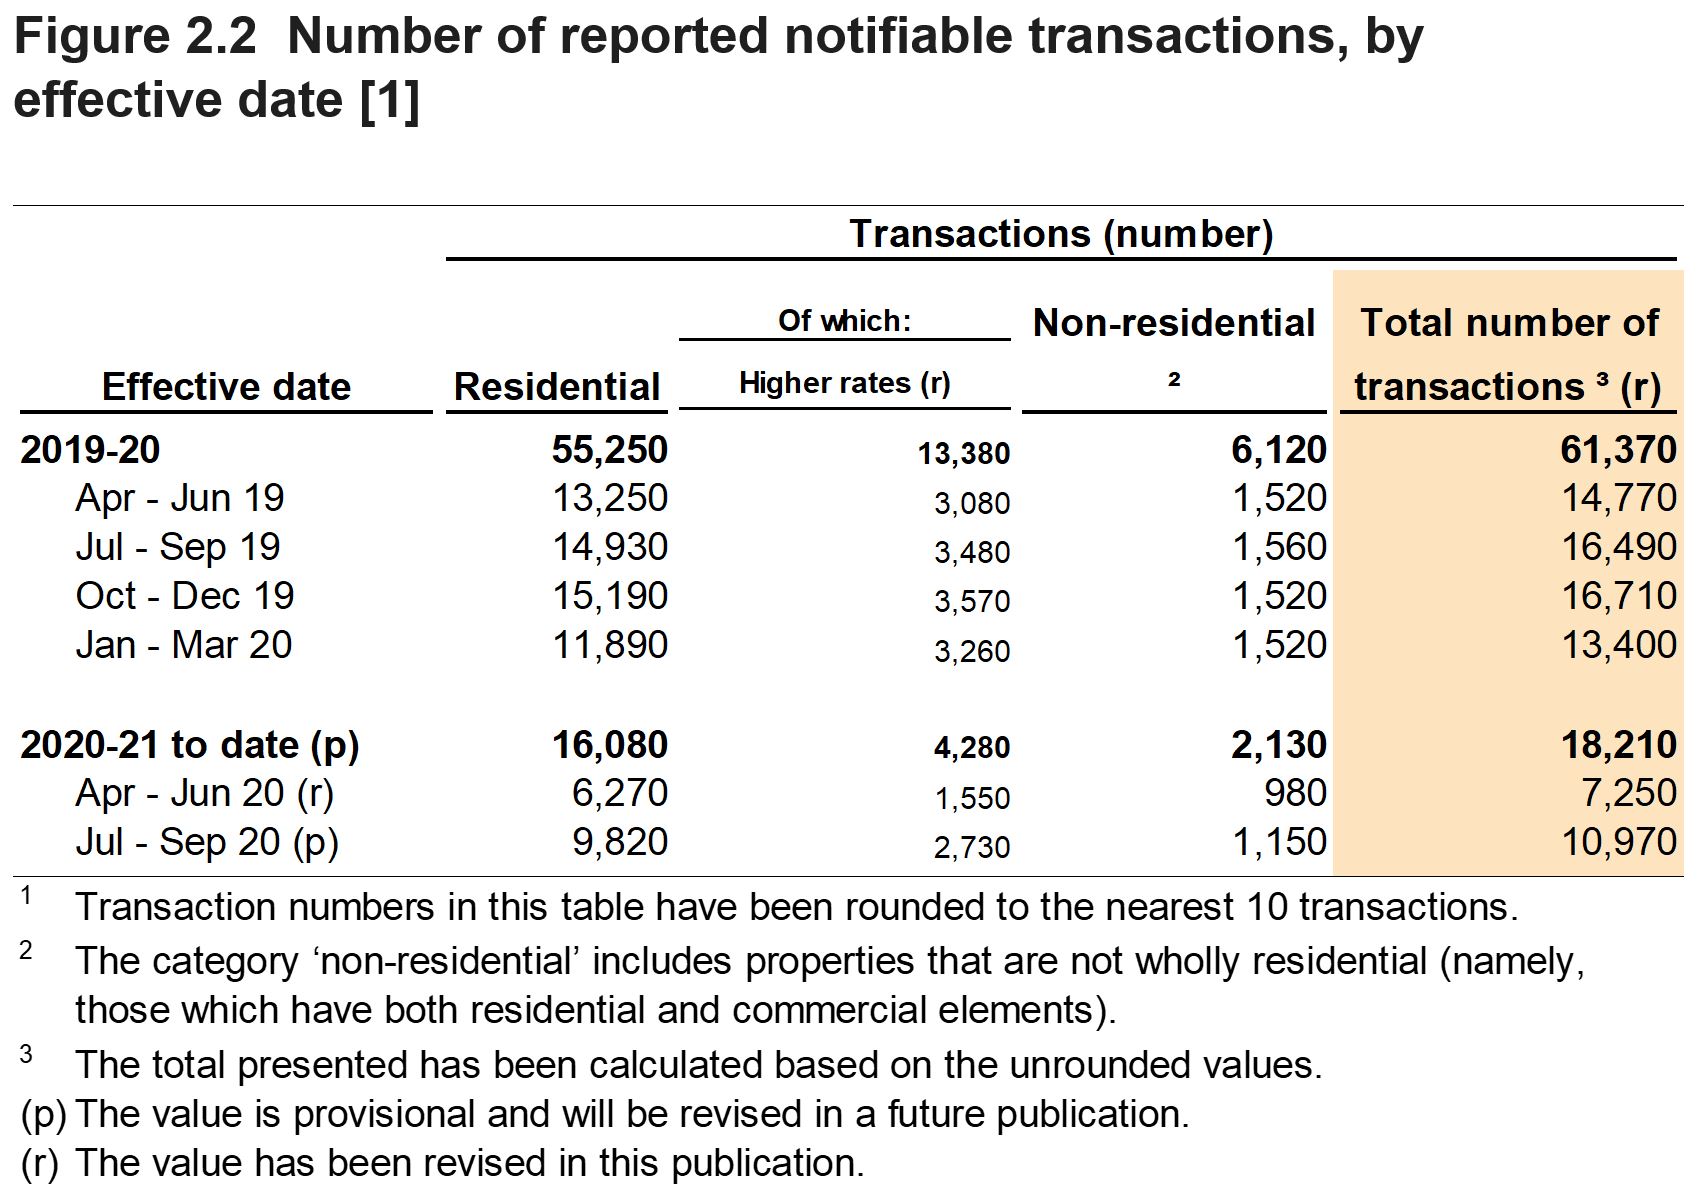 Figure 2.2 shows the number of reported notifiable transactions, by the quarter and year in which they were effective. Figure 2.2 also shows a breakdown for residential and non-residential transactions.